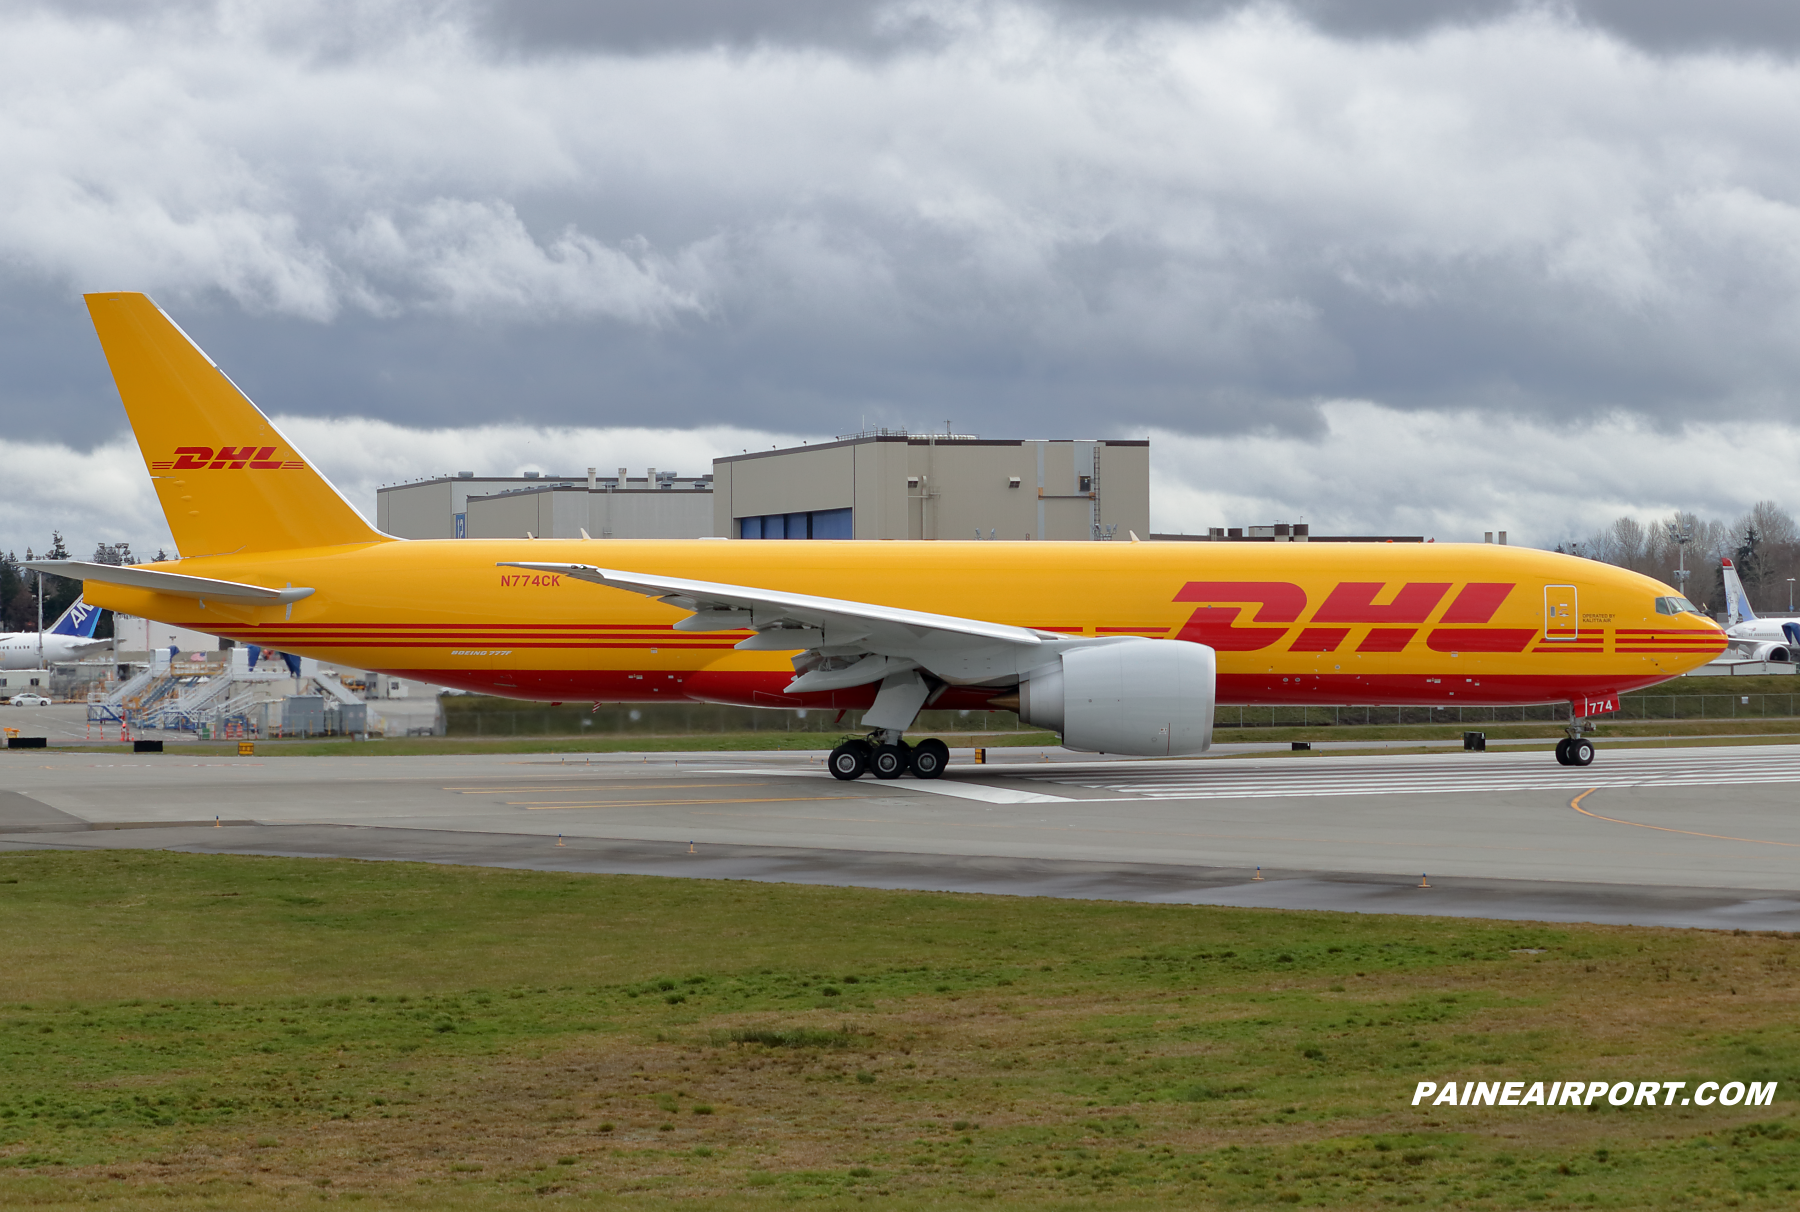 DHL 777F N774CK at Paine Field